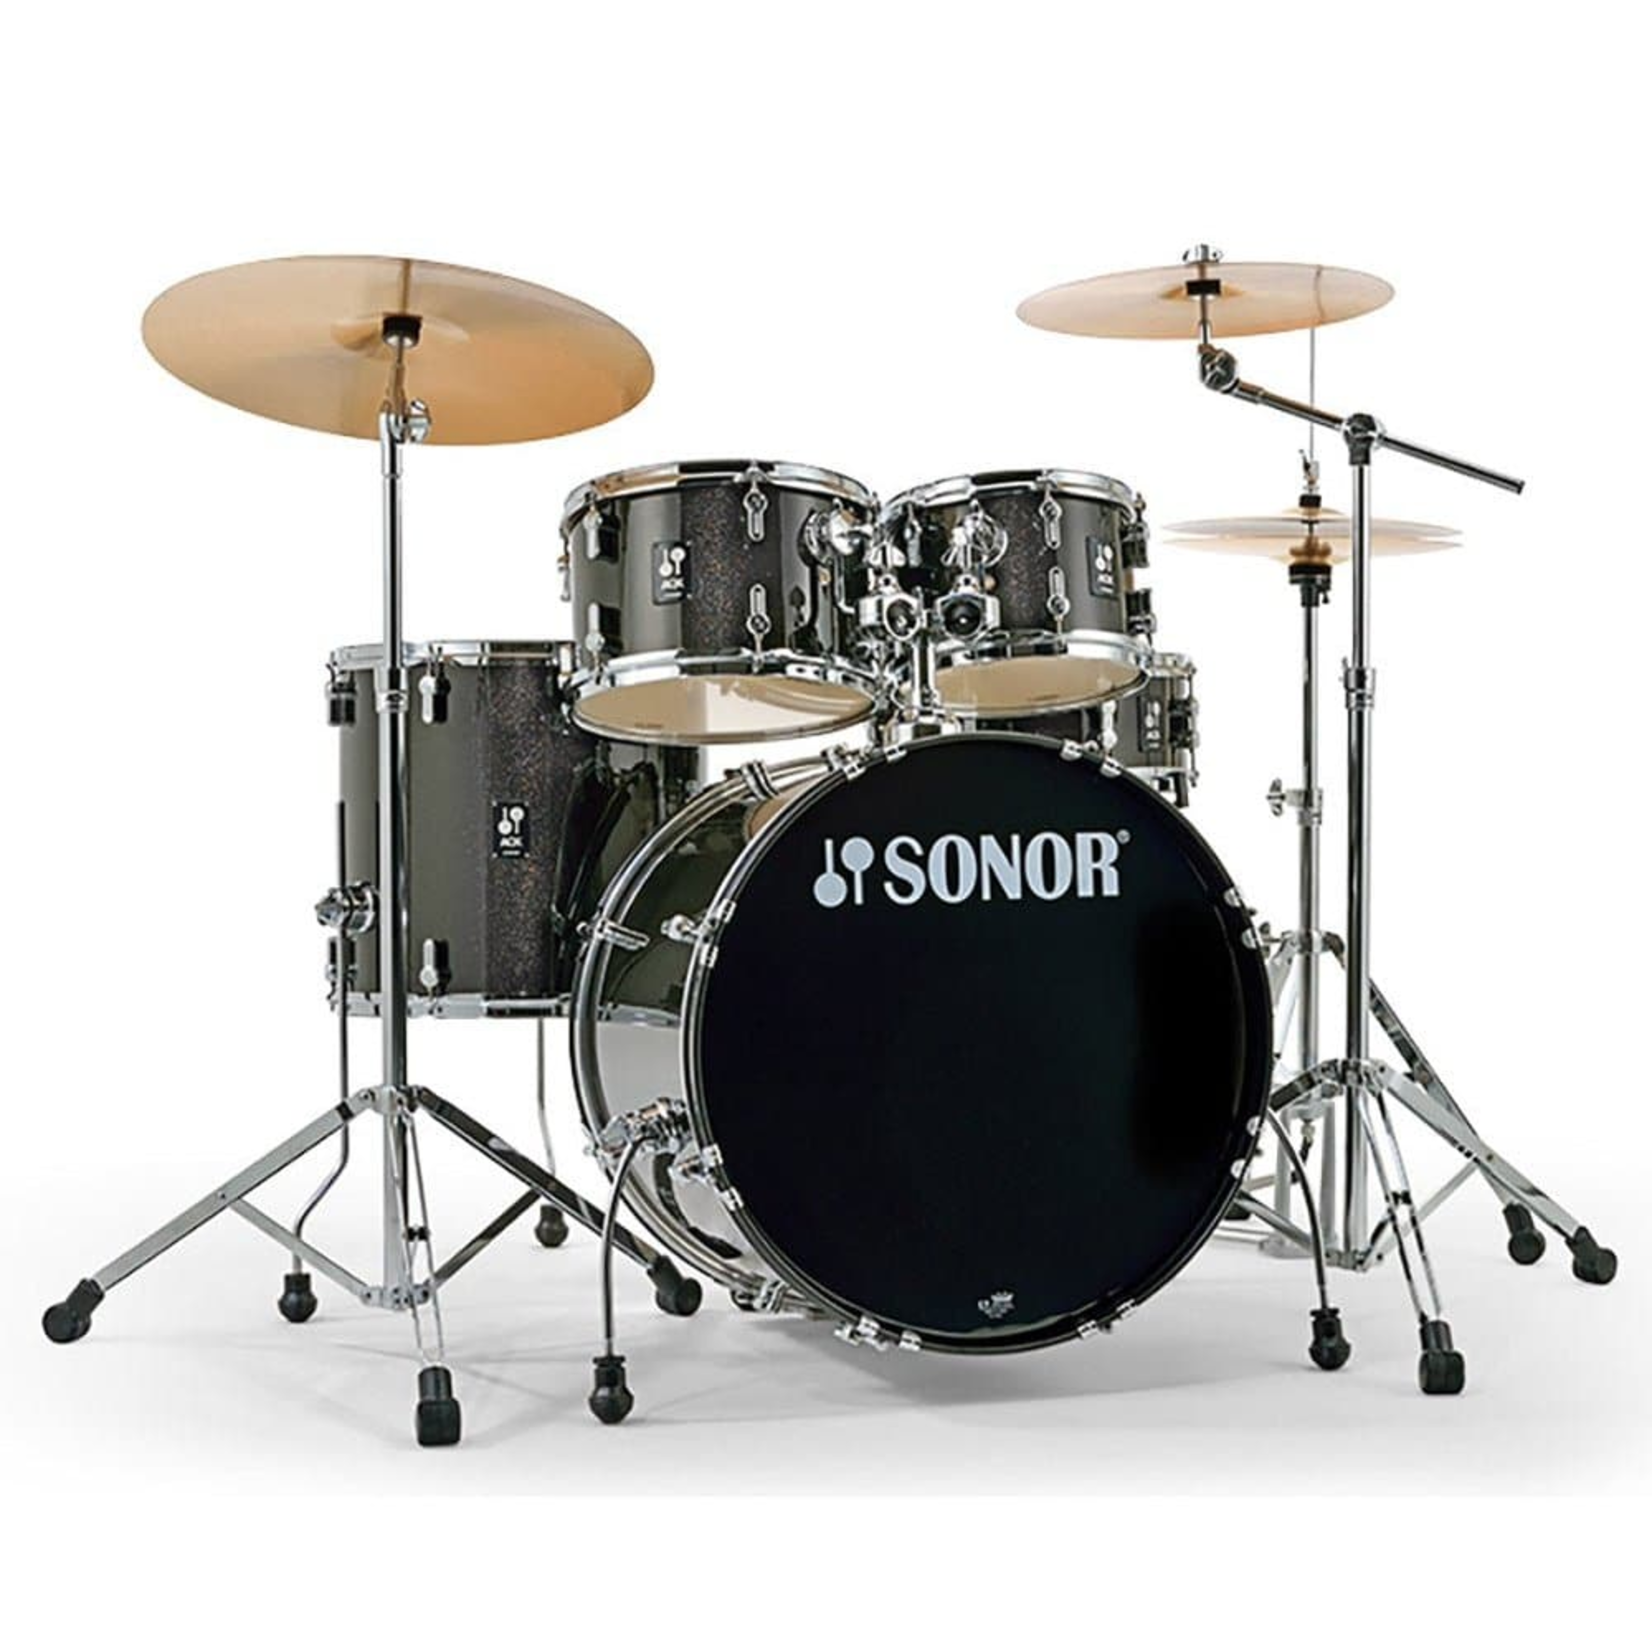 Sonor Sonor AQX Stage, Complete Kit with Hardware and Sabian SBR Cymbals 22/10/12/16/5.5x14SN (Black Midnight Sparkle)